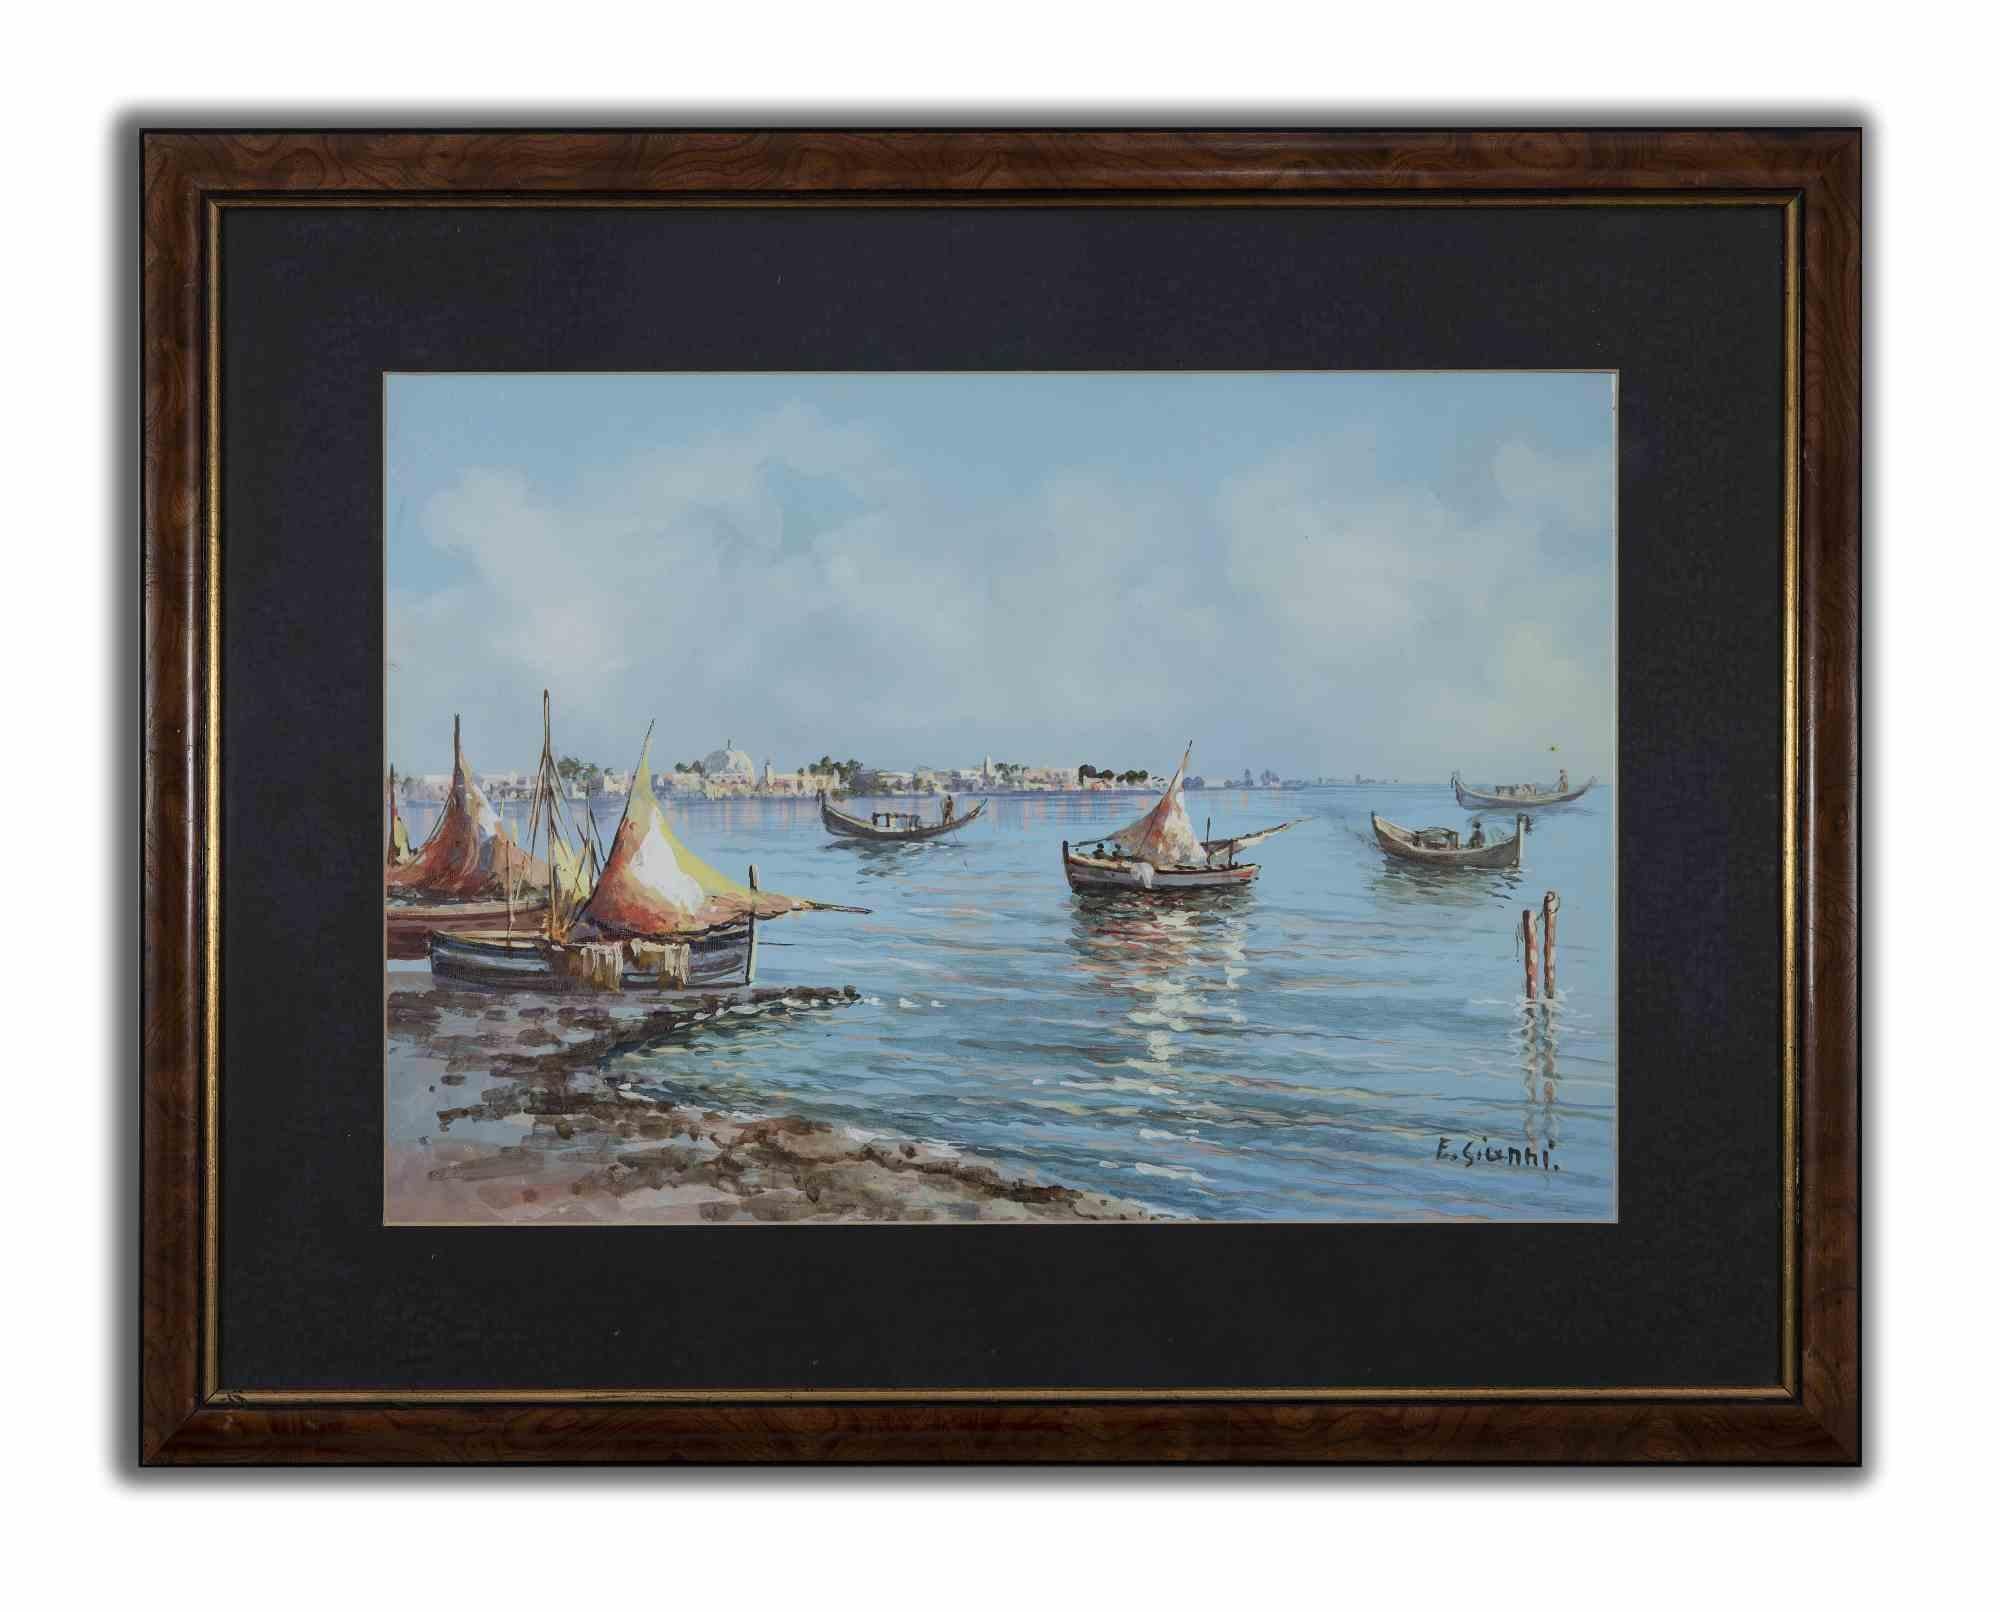 Boats in the sea is an original modern artwork realized in the early 20th century by Ettore Gianni.

Mixed colored gouache on paper.

Hand signed on the lower right margin.

Includes frame: 52.5 x 3 x 67.5 cm

